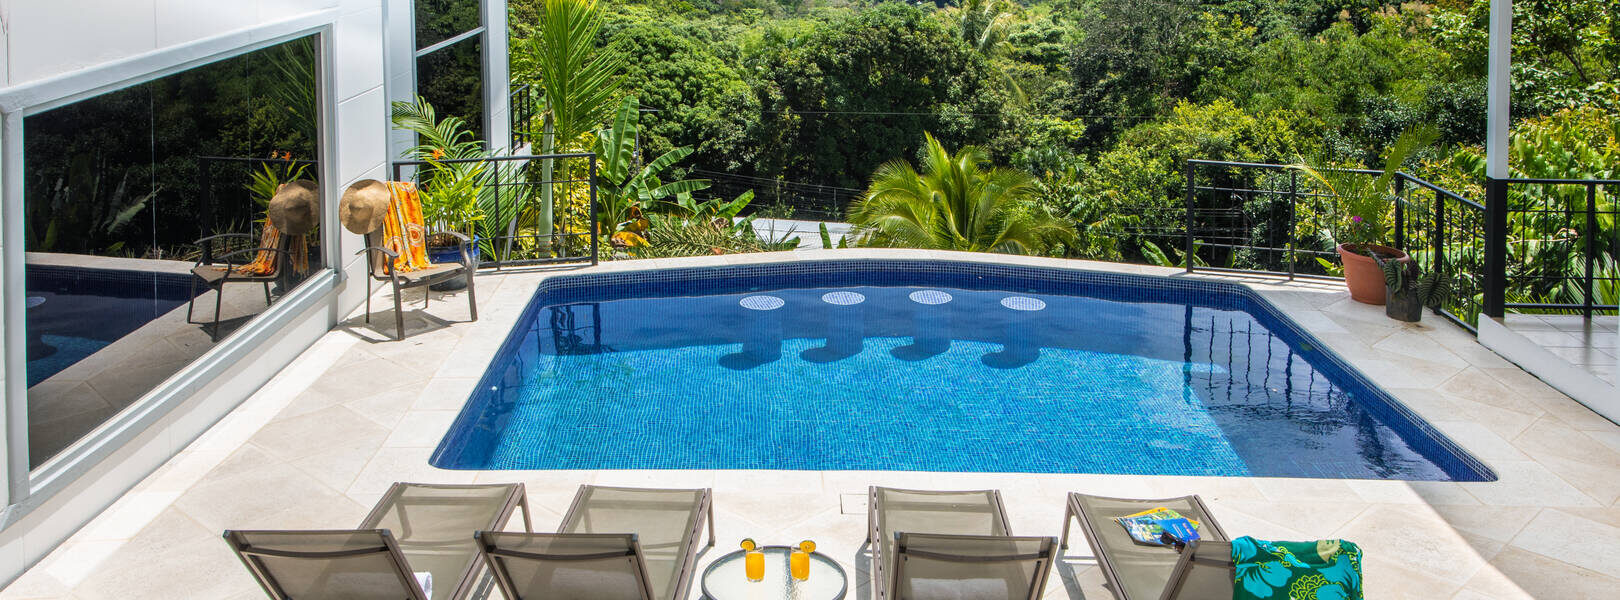 The private pool sits just steps from the main house and has a breathtaking Manuel Antonio ocean view.